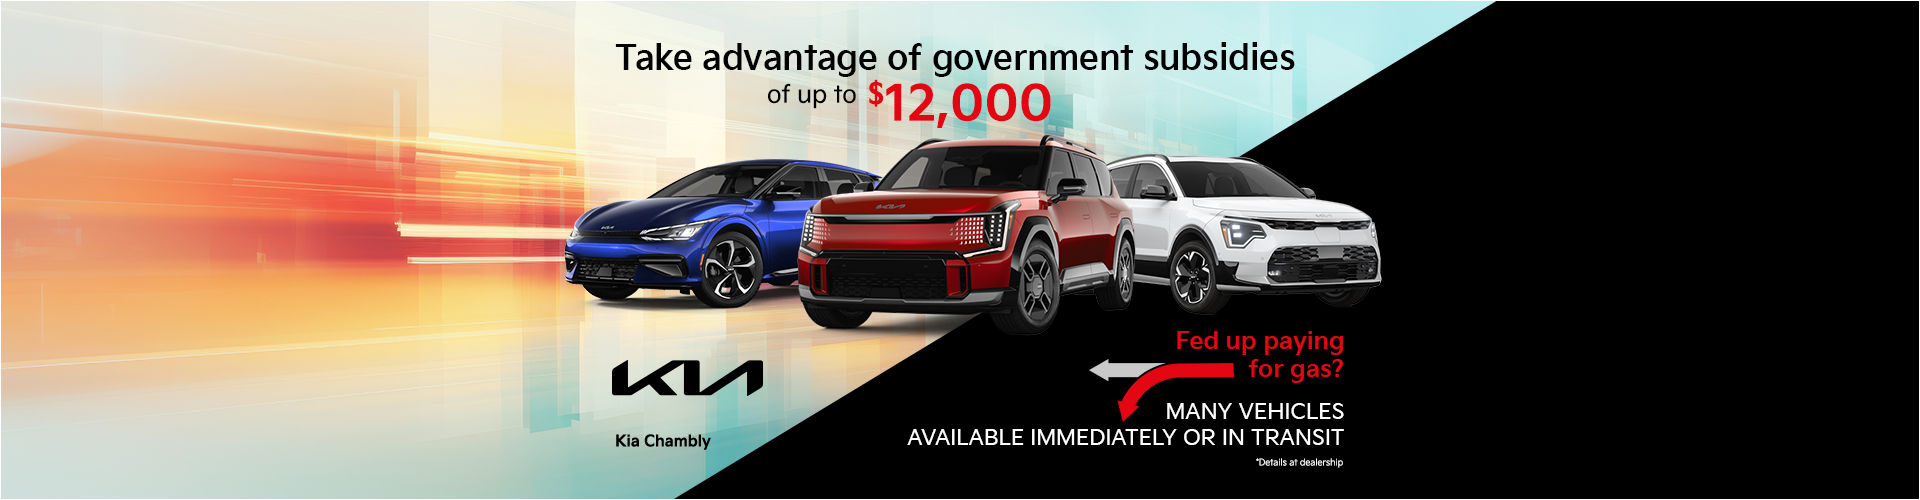 Government subsidies for electric vehicles